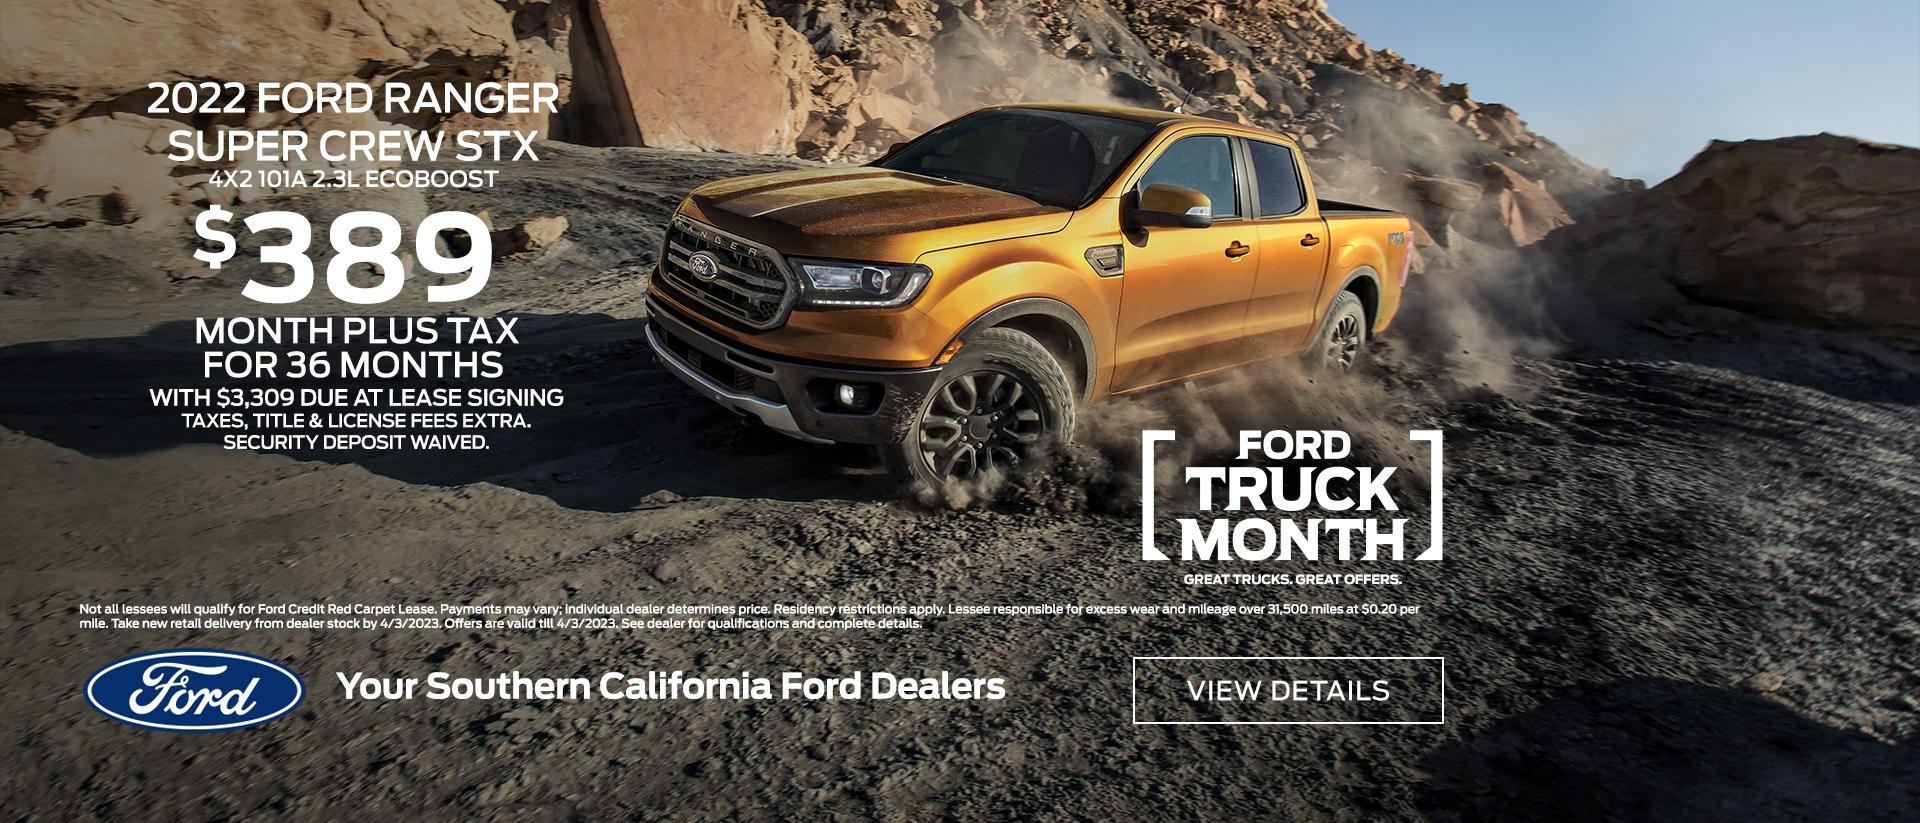 2022 Ford Ranger Lease Offer | Southern California Ford Dealers